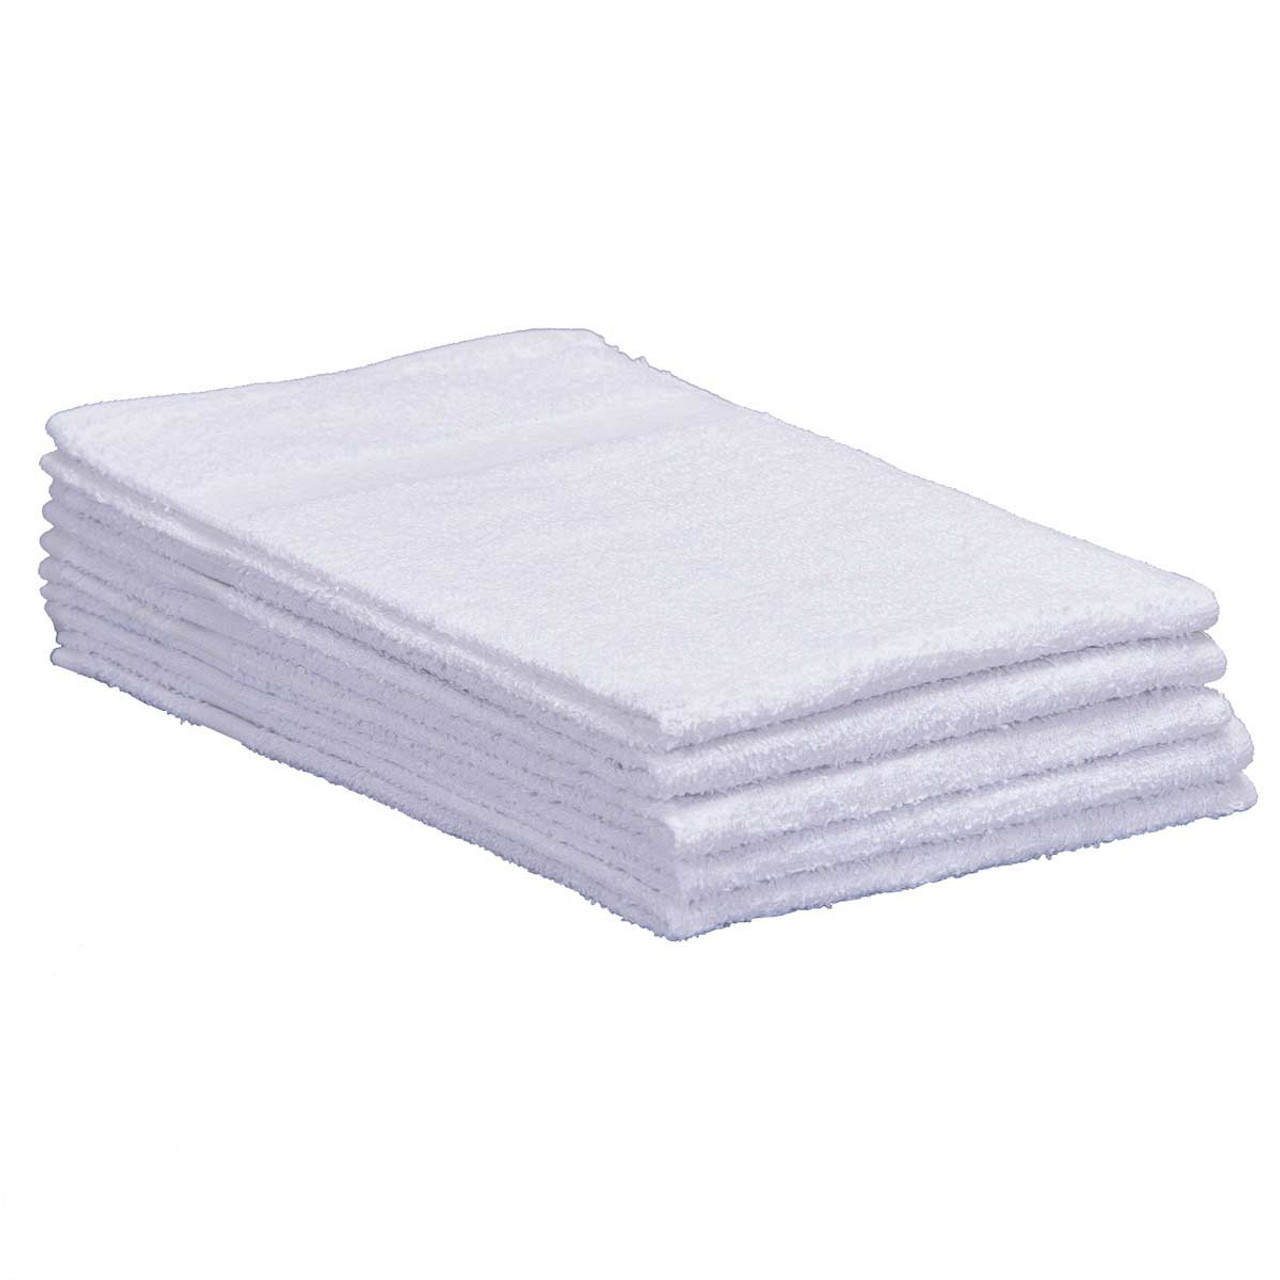 Wholesale White Hand Towels, 15x25